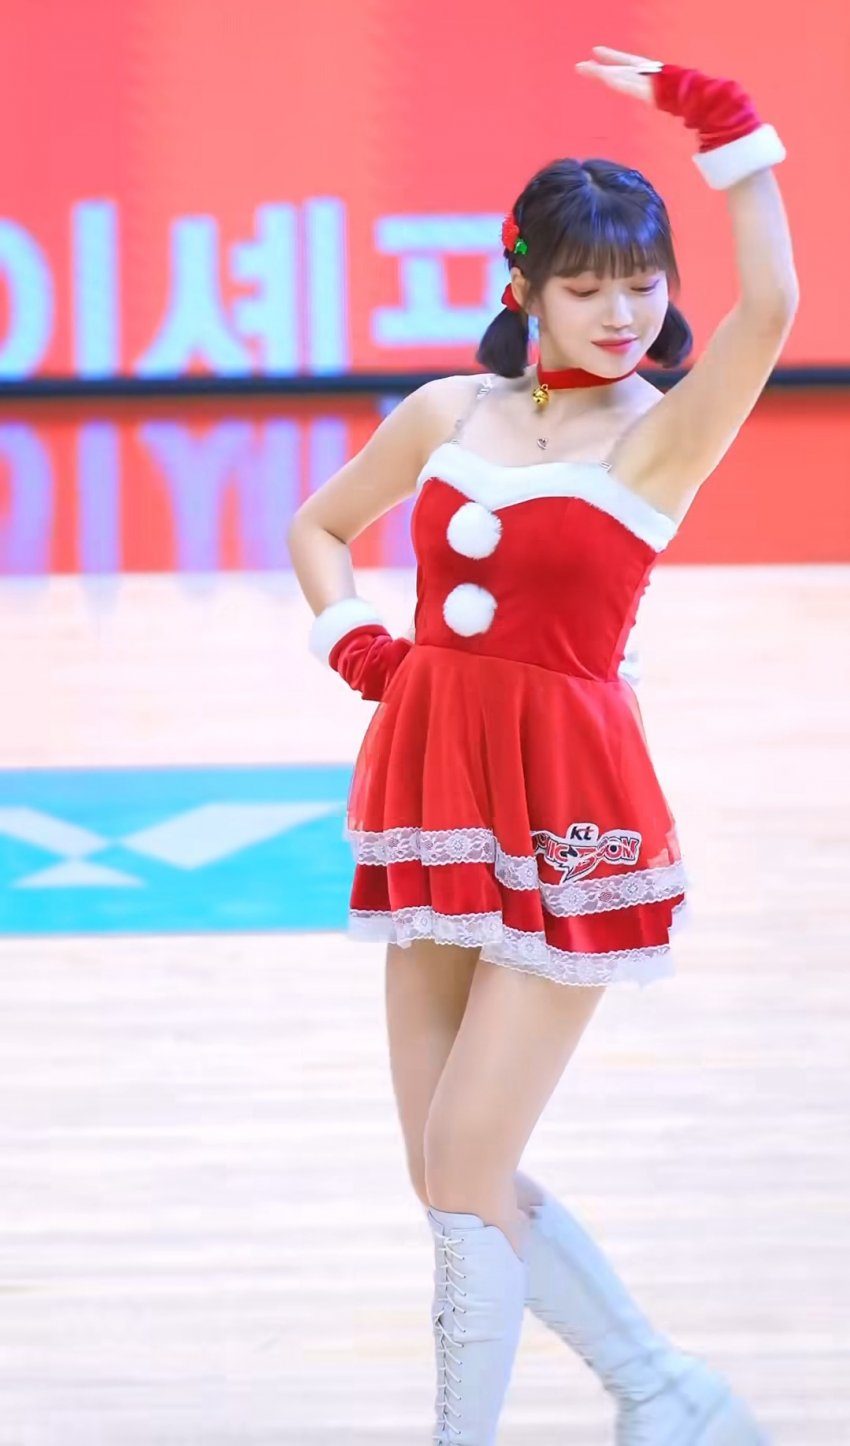 Park So Young's cheerleader